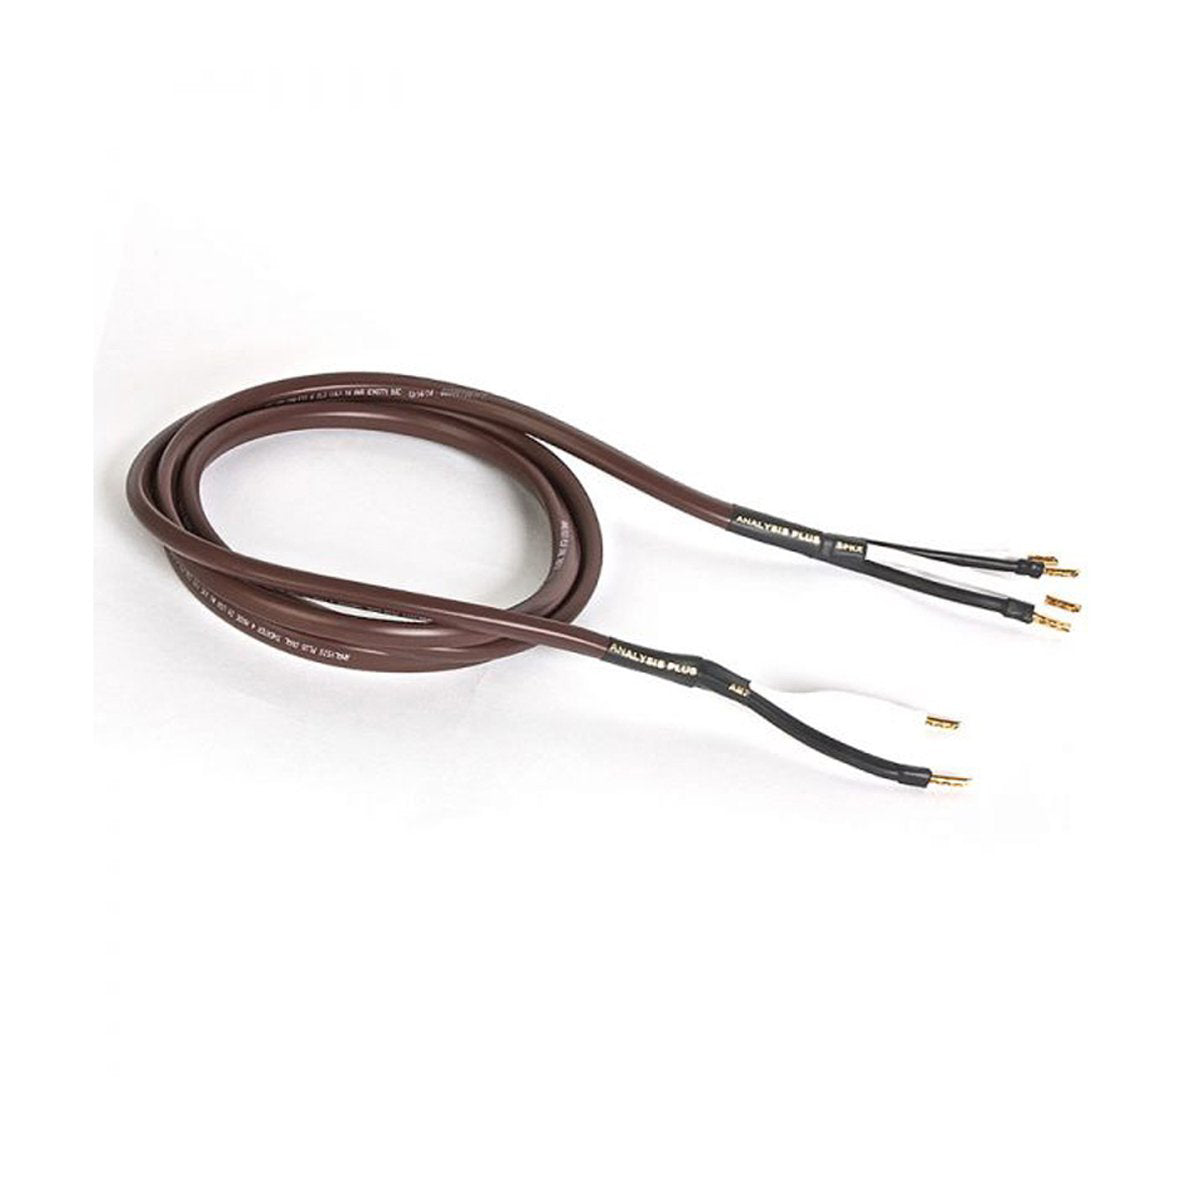 Analysis Plus Oval Chocolate 12/2 Speaker Cable - The Audio Experts